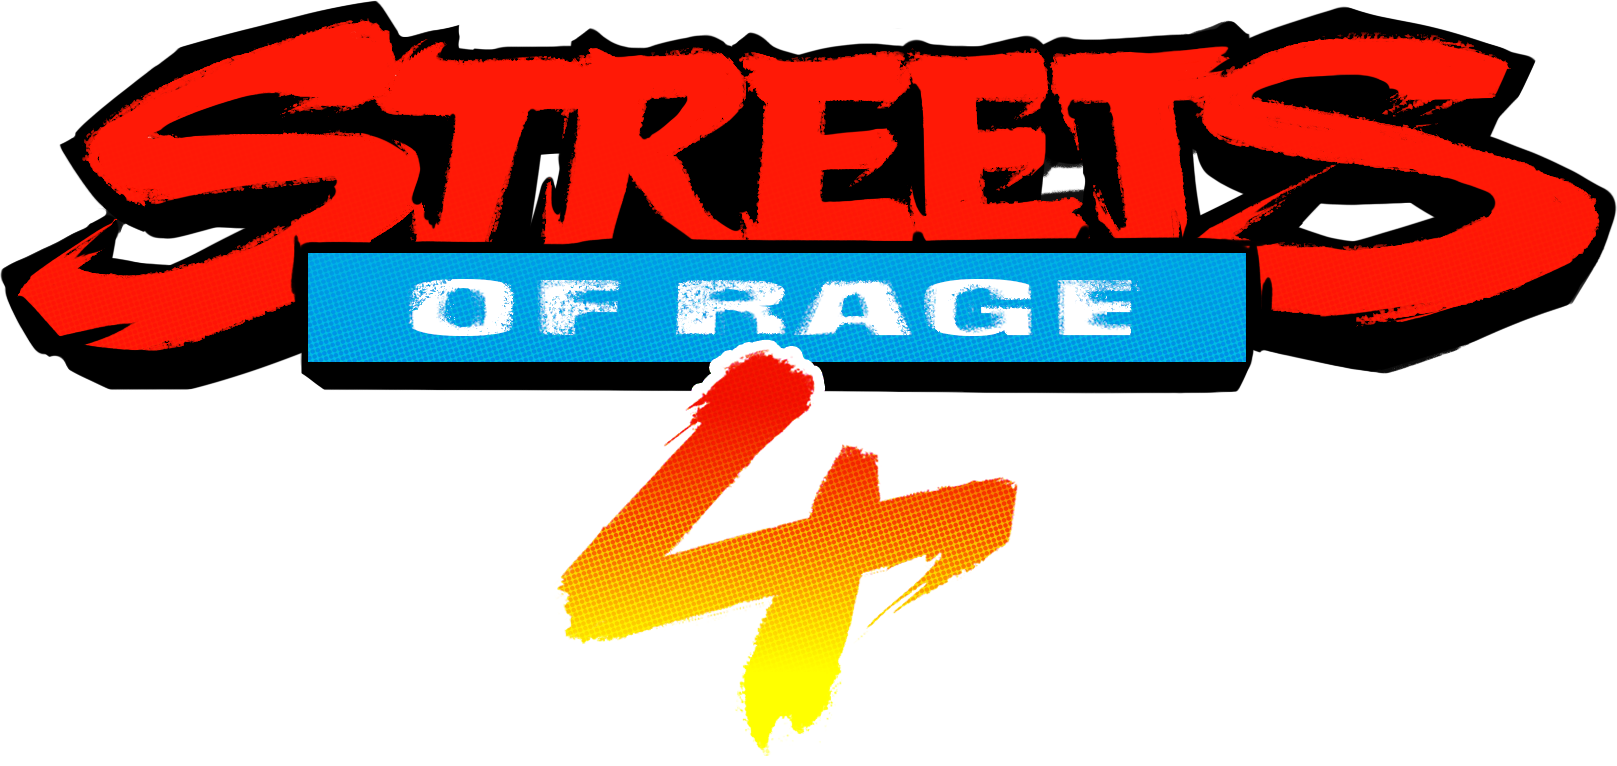 Streets of Rage 4 cover